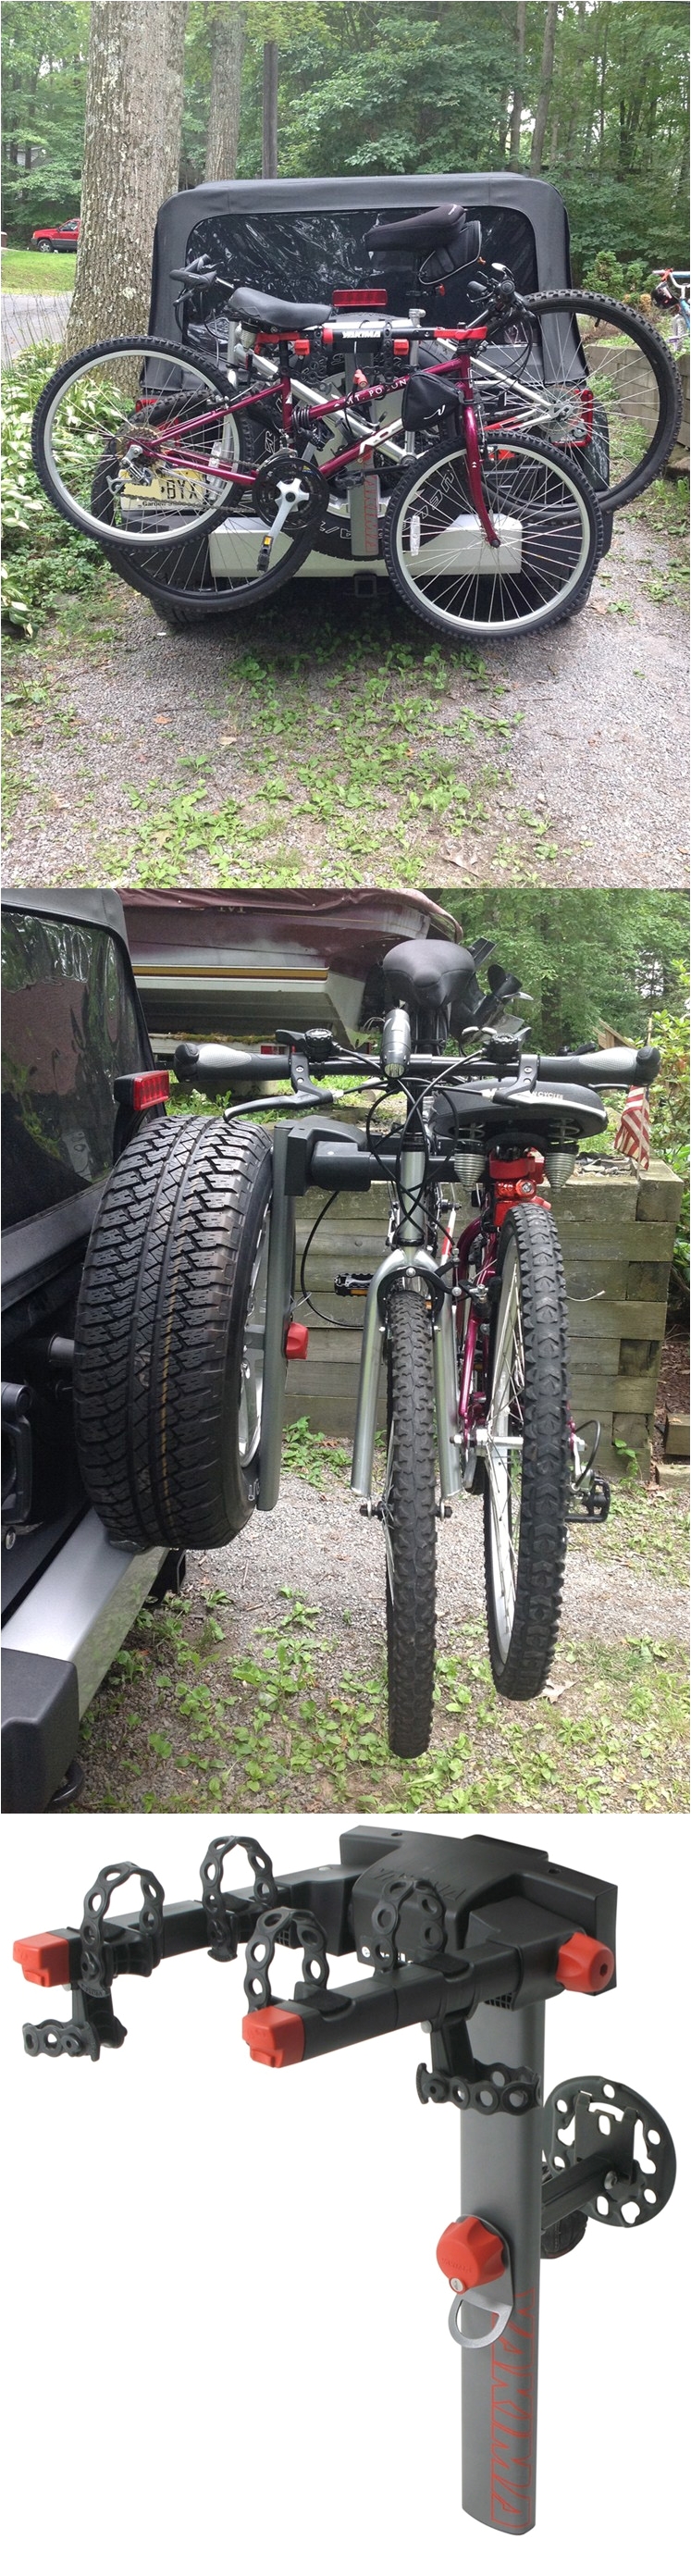 securely mount this bike rack to the spare tire of the jeep wrangler jeep bike rack thule grand cherokee reviews wrangler